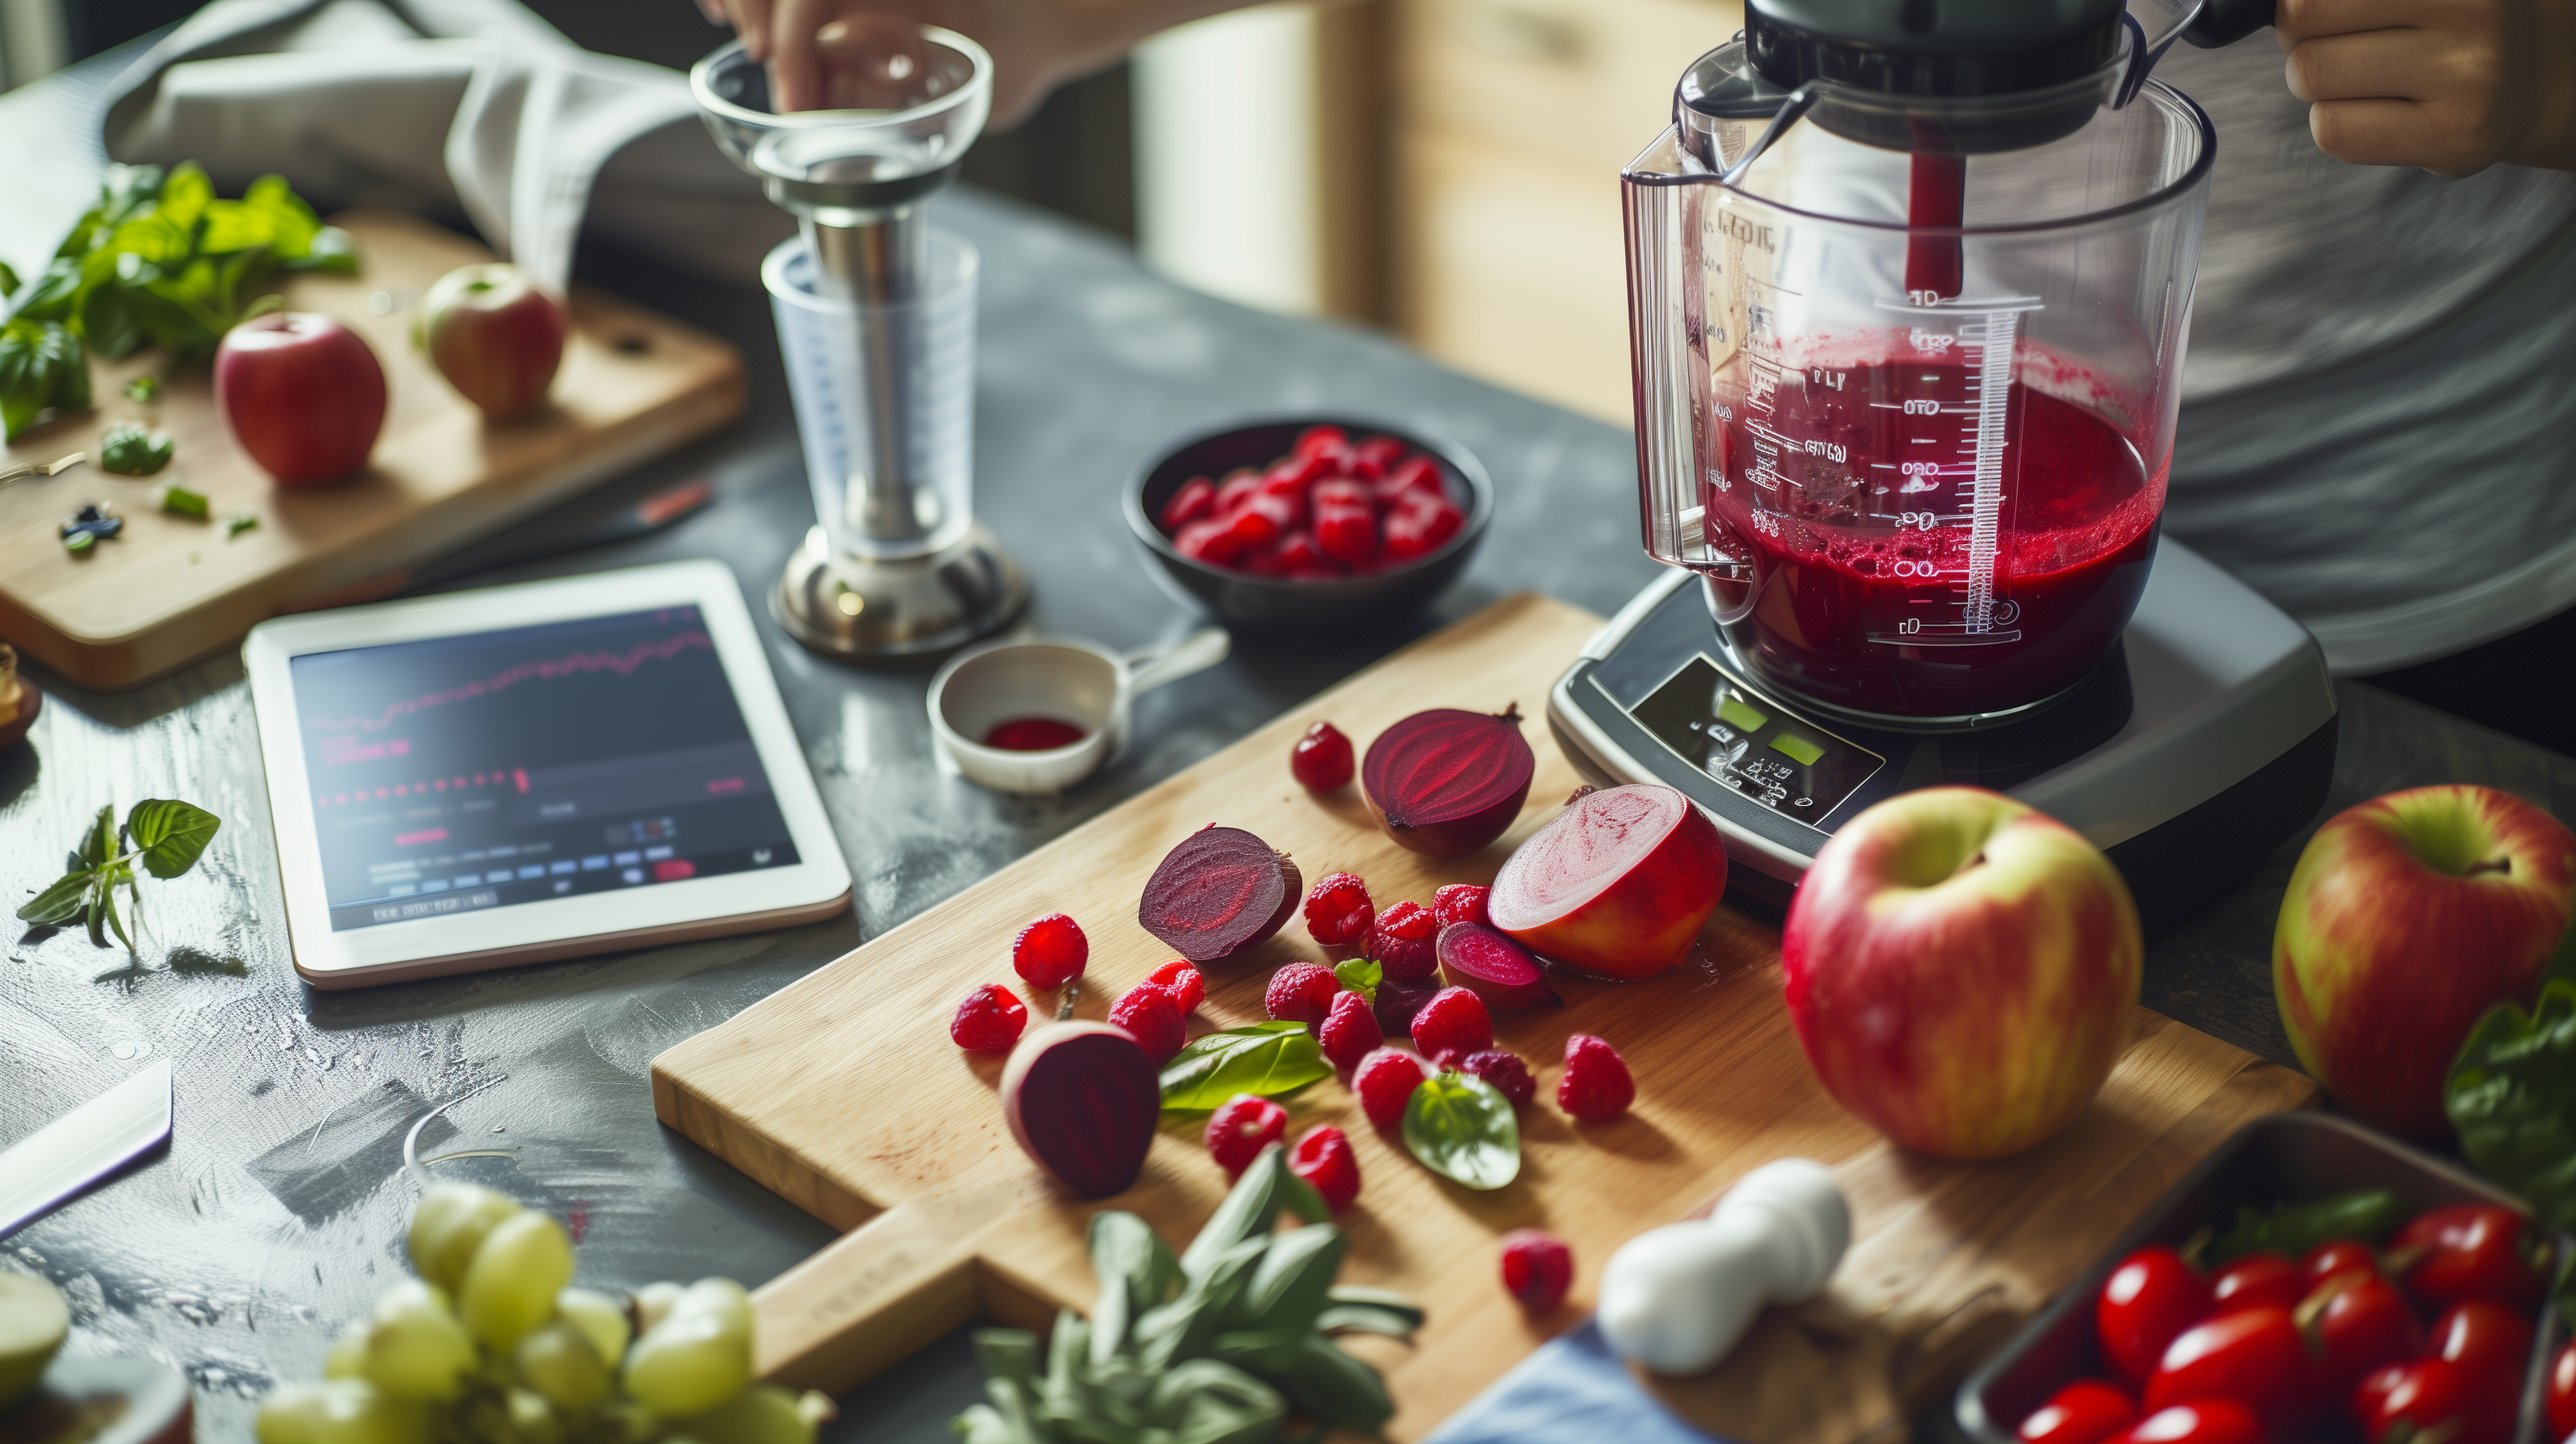 kitchen counter with a blender, various red superfoods (berries, beets, red apples)